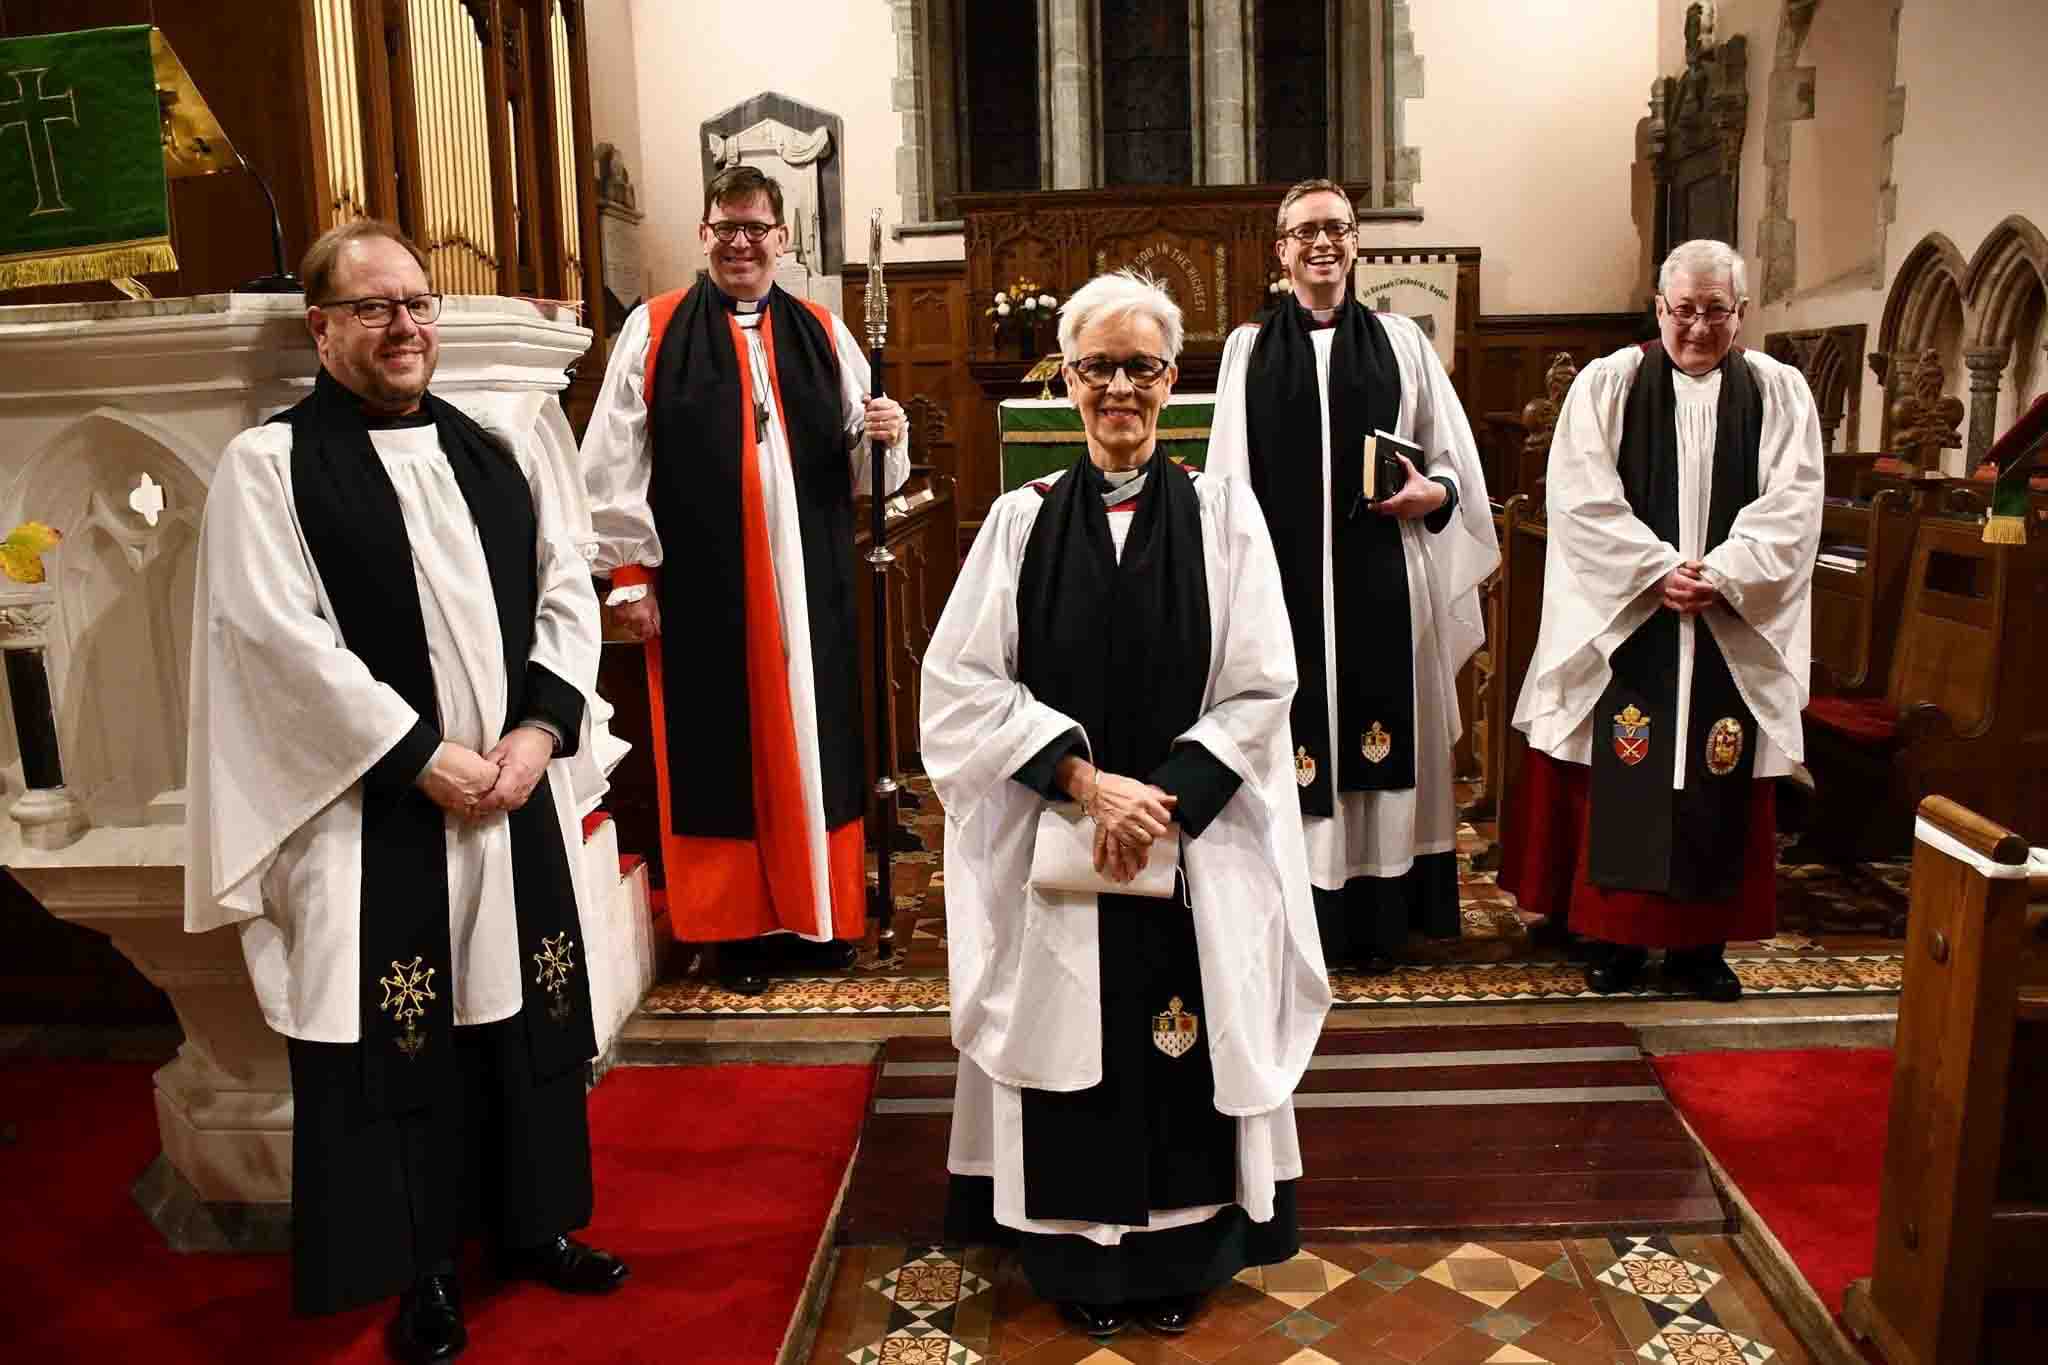 The Rev Adam Pullen (preacher); the Rt Rev Andrew Forster (Bishop of Derry and Raphoe); the Rev Canon Judi McGaffin; the Ven David Huss (Archdeacon of Raphoe); and the Very Rev Raymond Stewart (Dean of Derry).